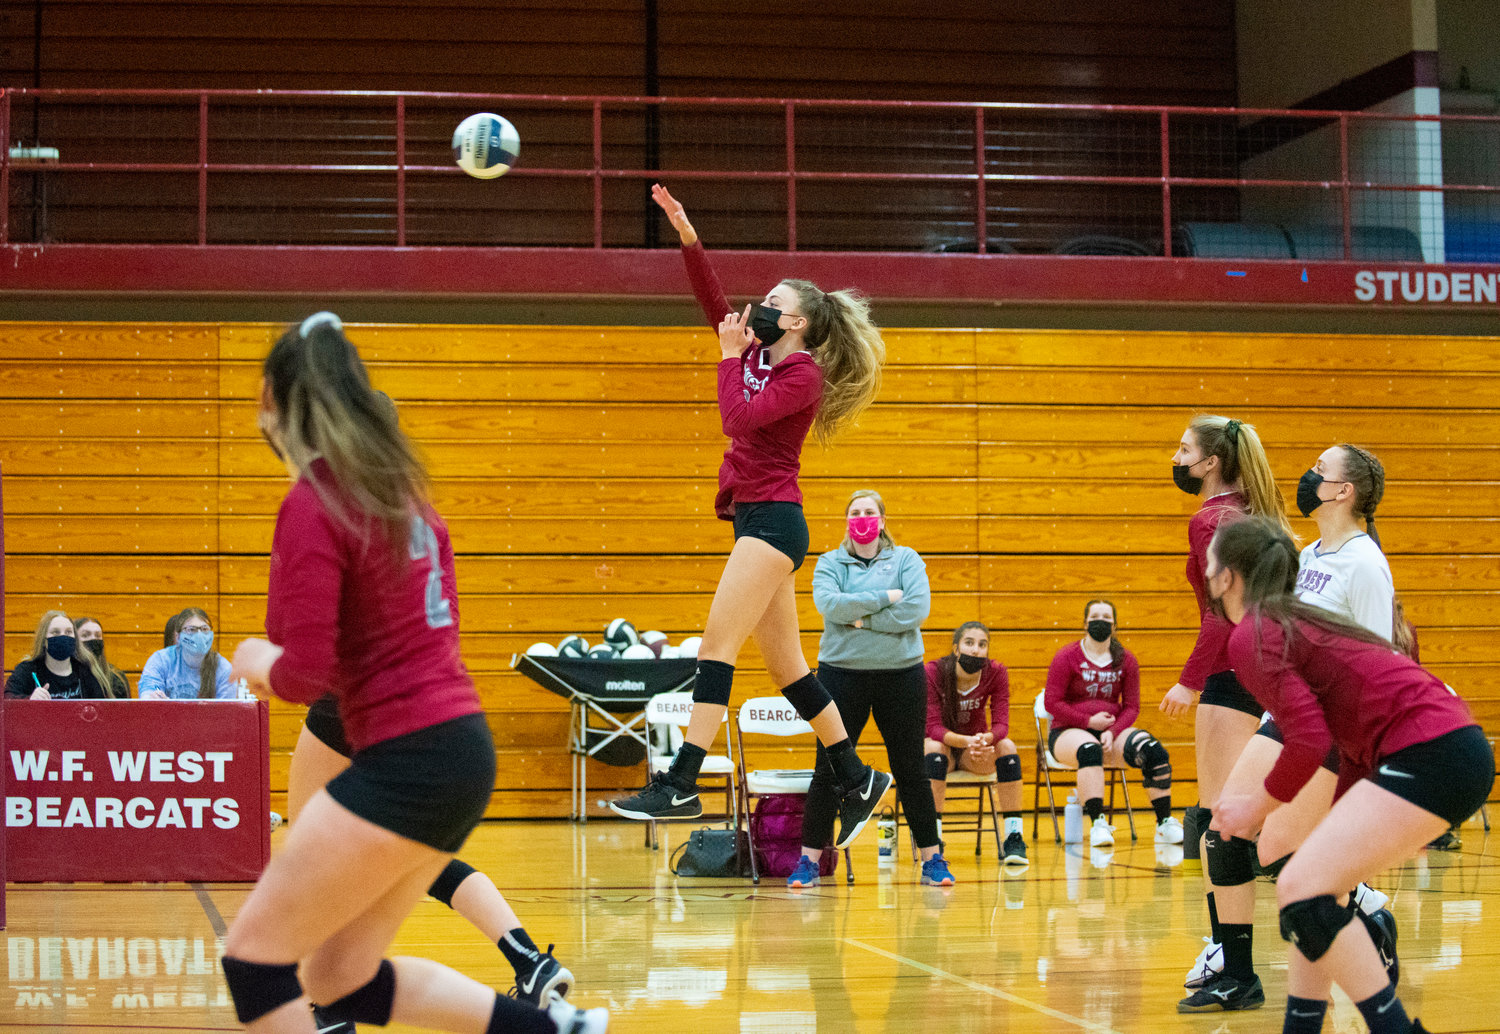 W.F. West's Amelia Etue rises for a spike against Aberdeen on Tuesday.